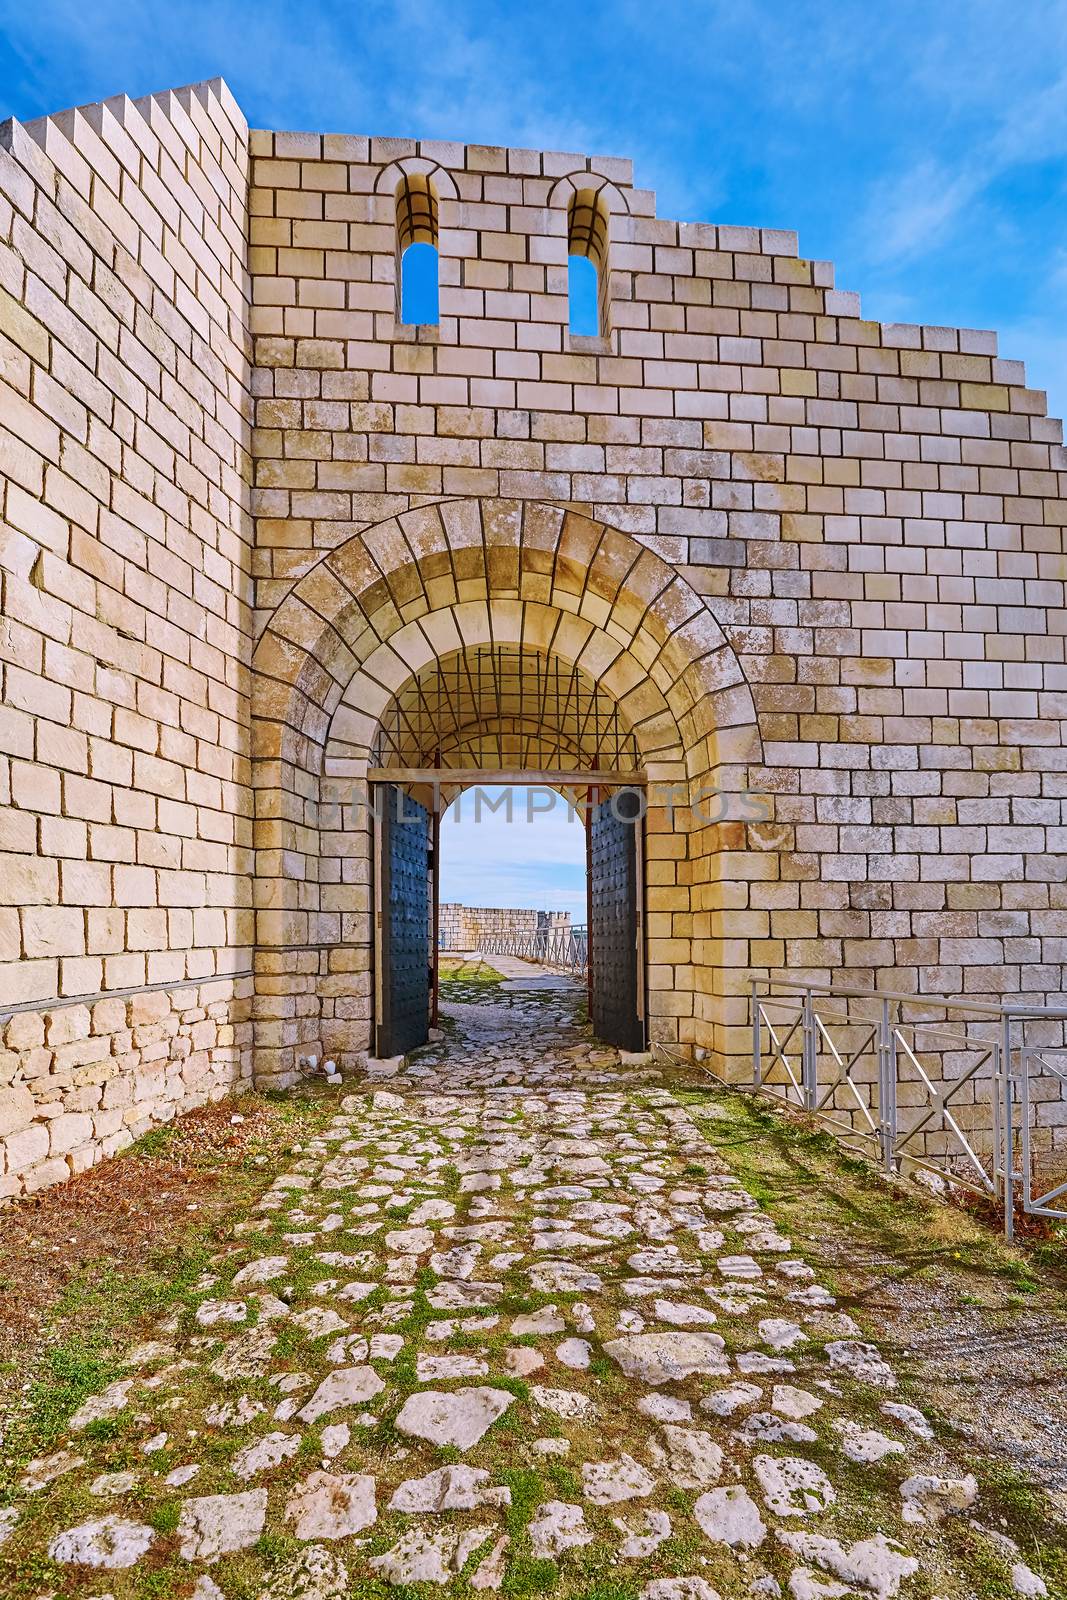 Main Entry of the Shumen Fortress, Bulgaria